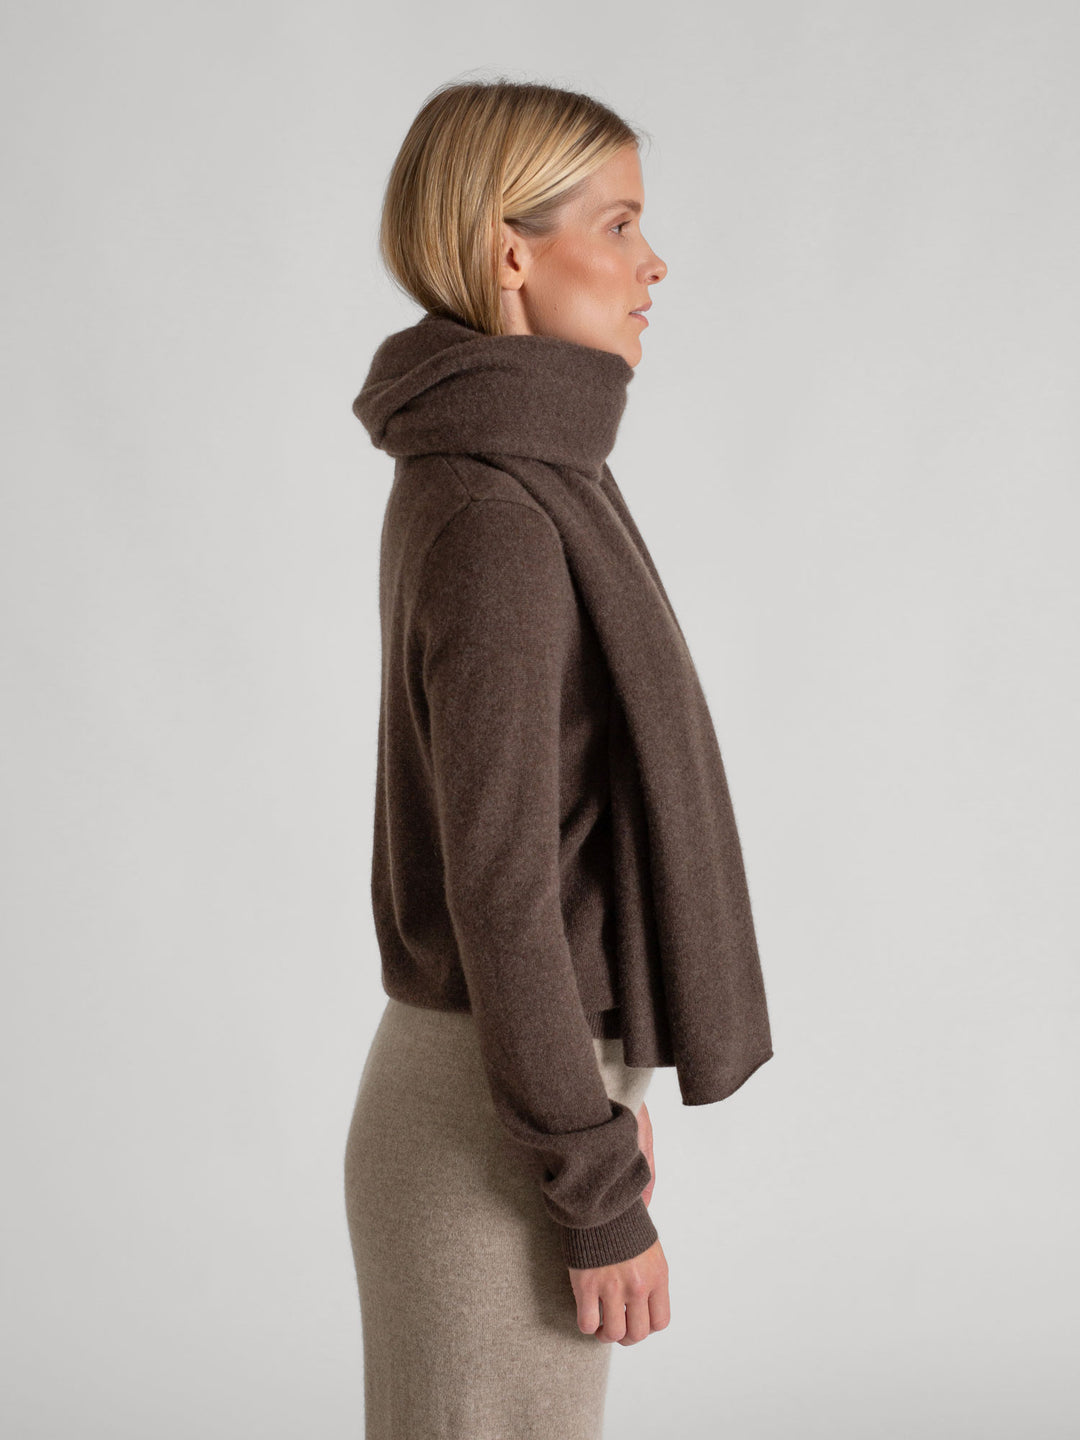 Airy cashmere scarf "Flow" in color: Dark Brown. 100% cashmere from kashmina.